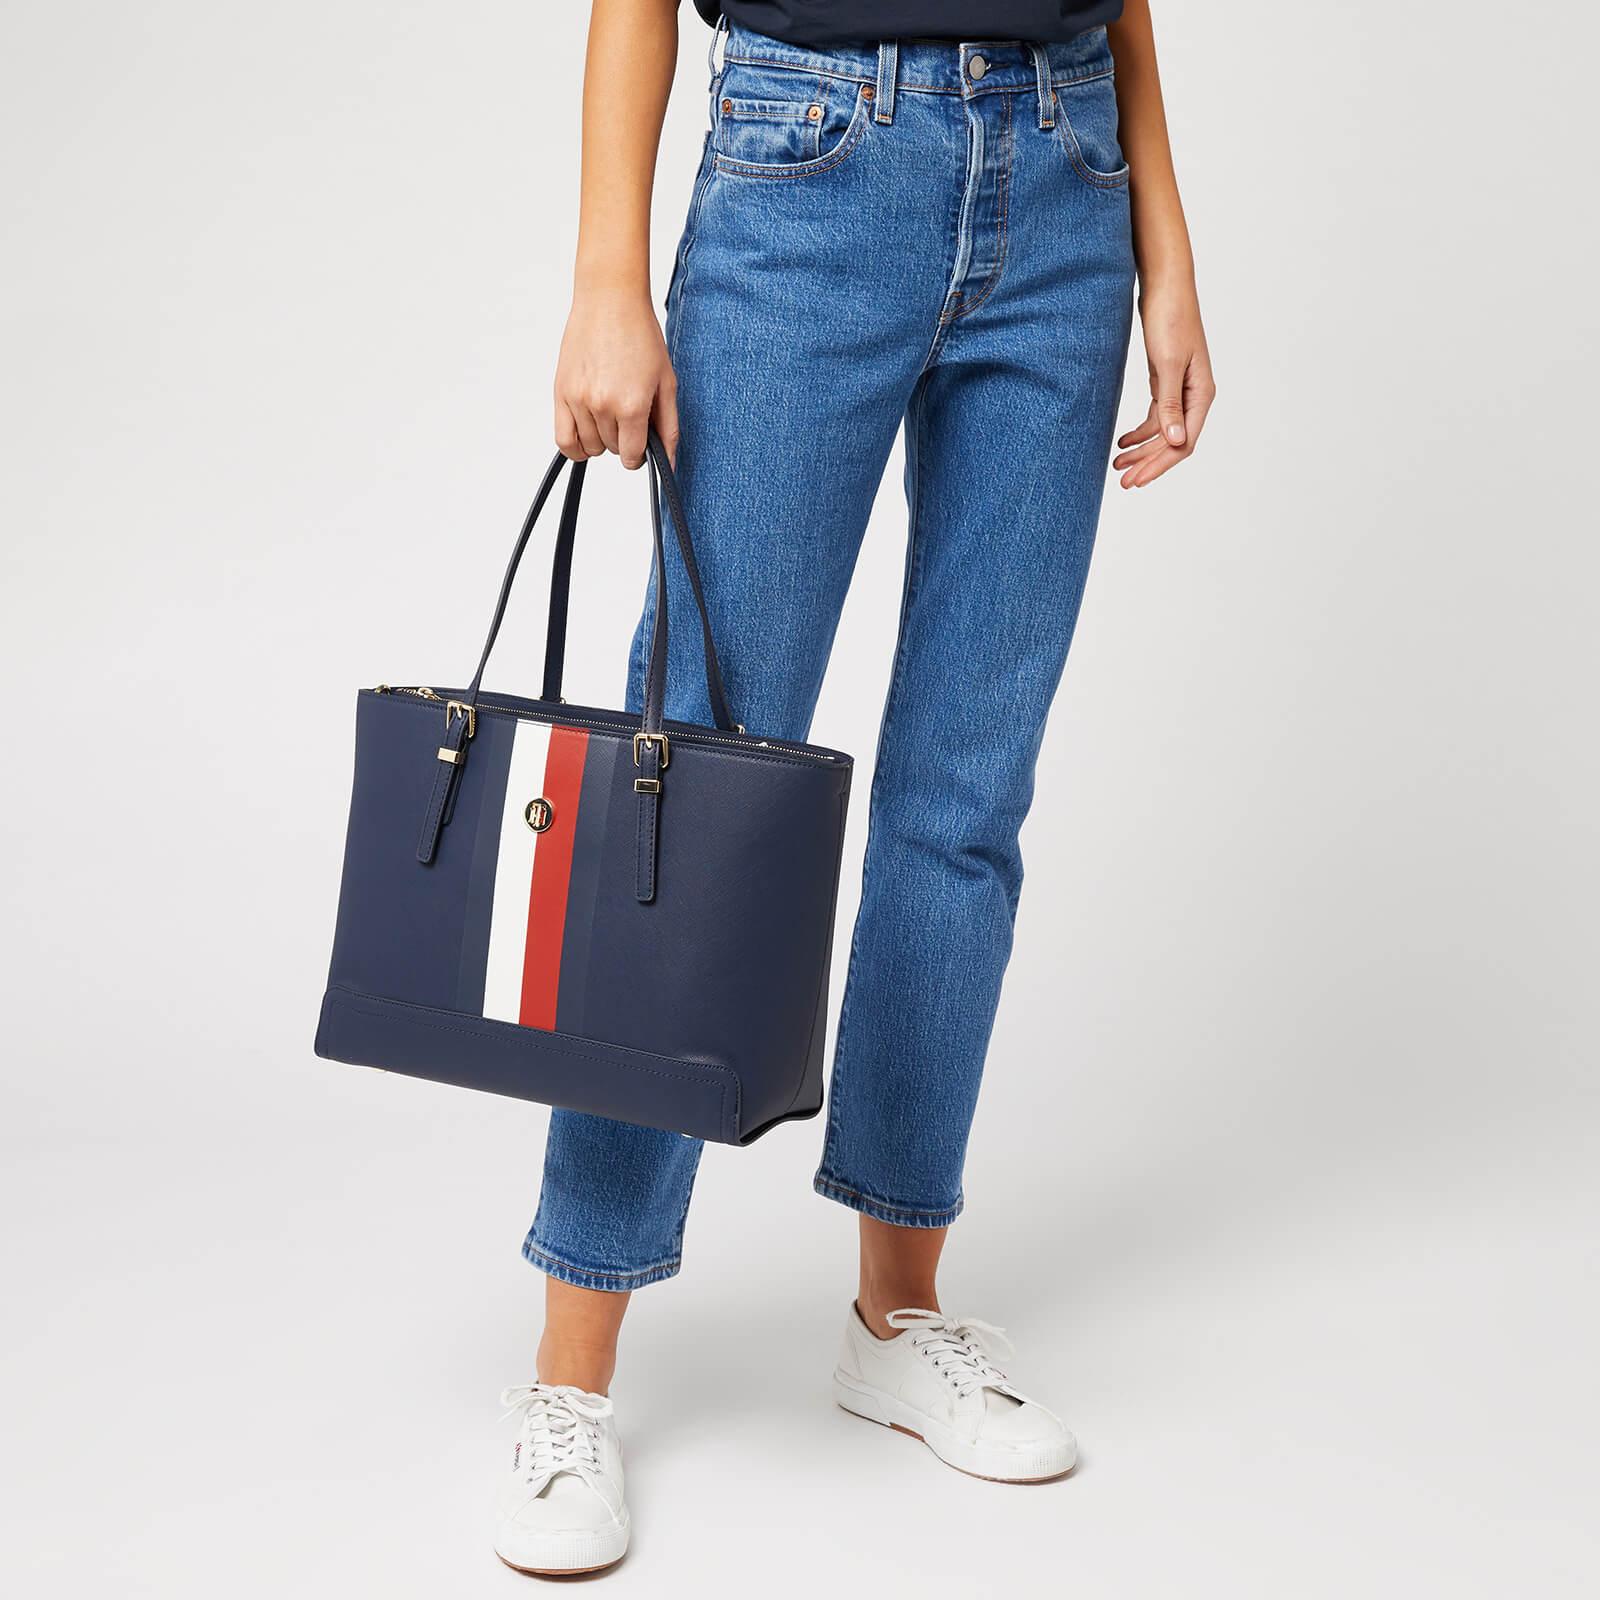 Tommy Hilfiger Synthetic Honey Medium Tote Bag in Navy (Blue) - Lyst